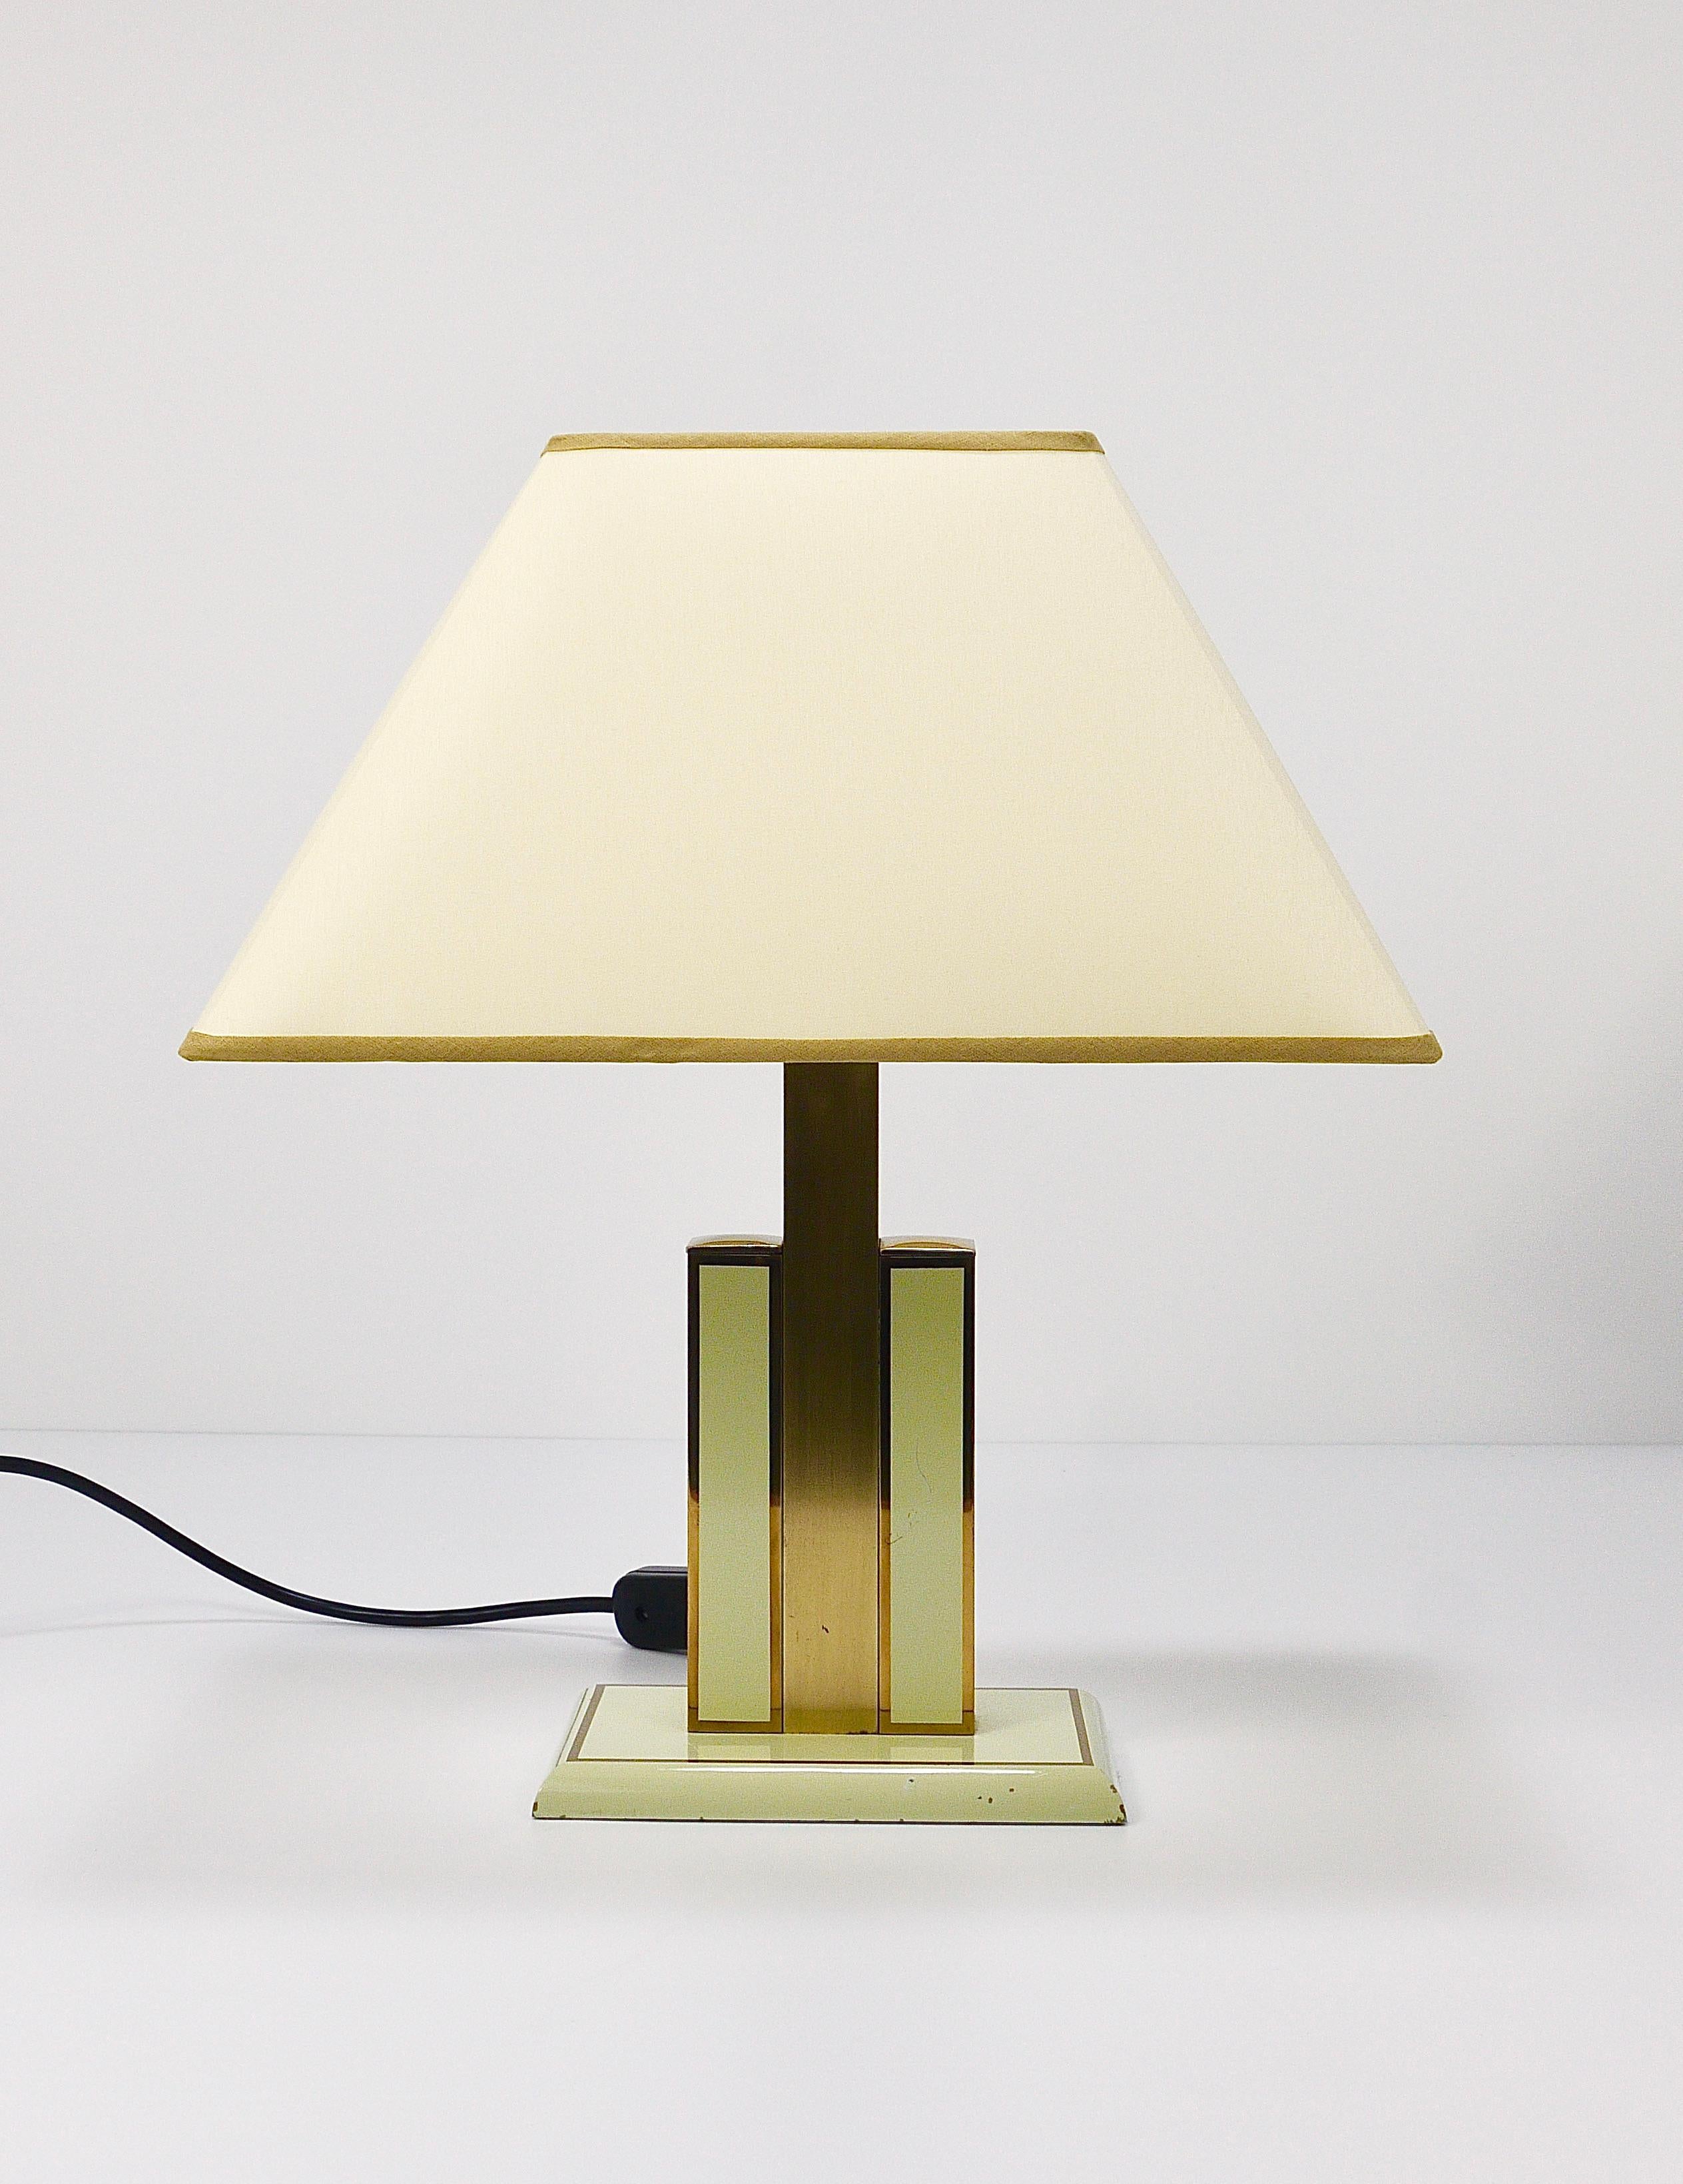 Pair Romeo Rega Ivory & Gold Midcentury Brass Table Side Lamps, Italy, 1970s For Sale 3